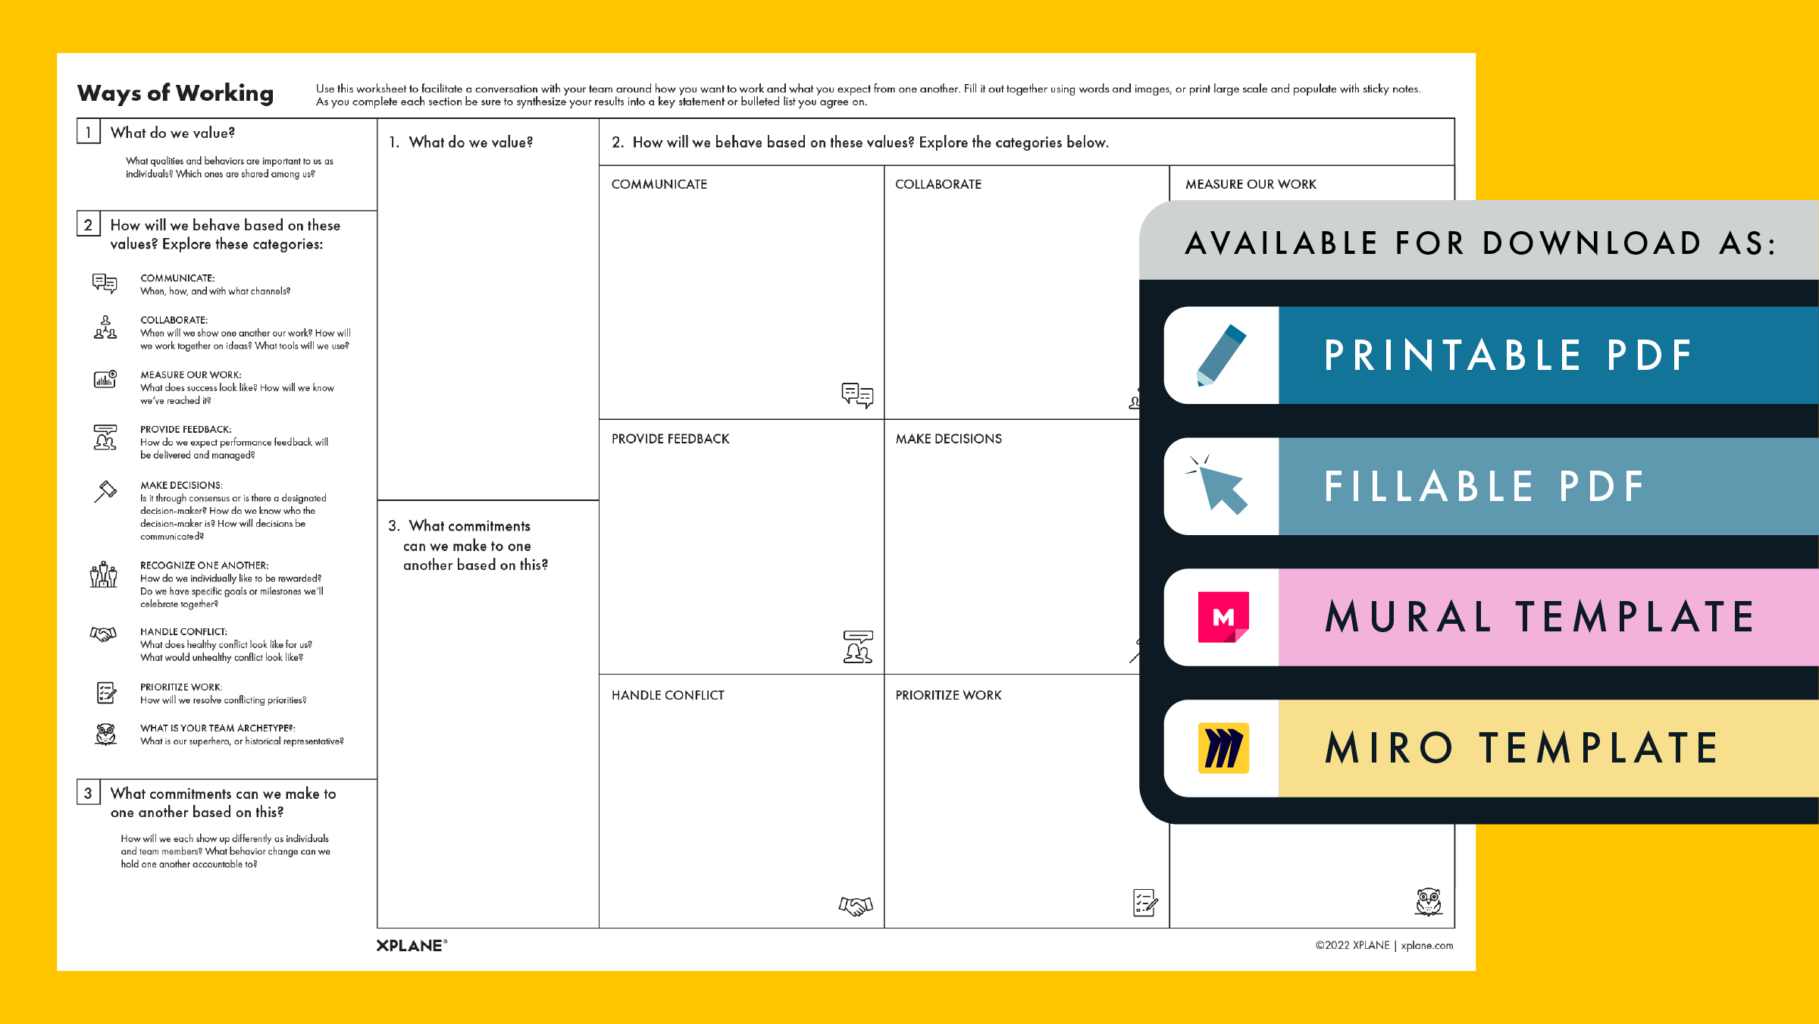 Ways of Working worksheet against a yellow background. Four tabs under the header "AVAILABLE FOR DOWNLOAD AS" indicate available file types available.